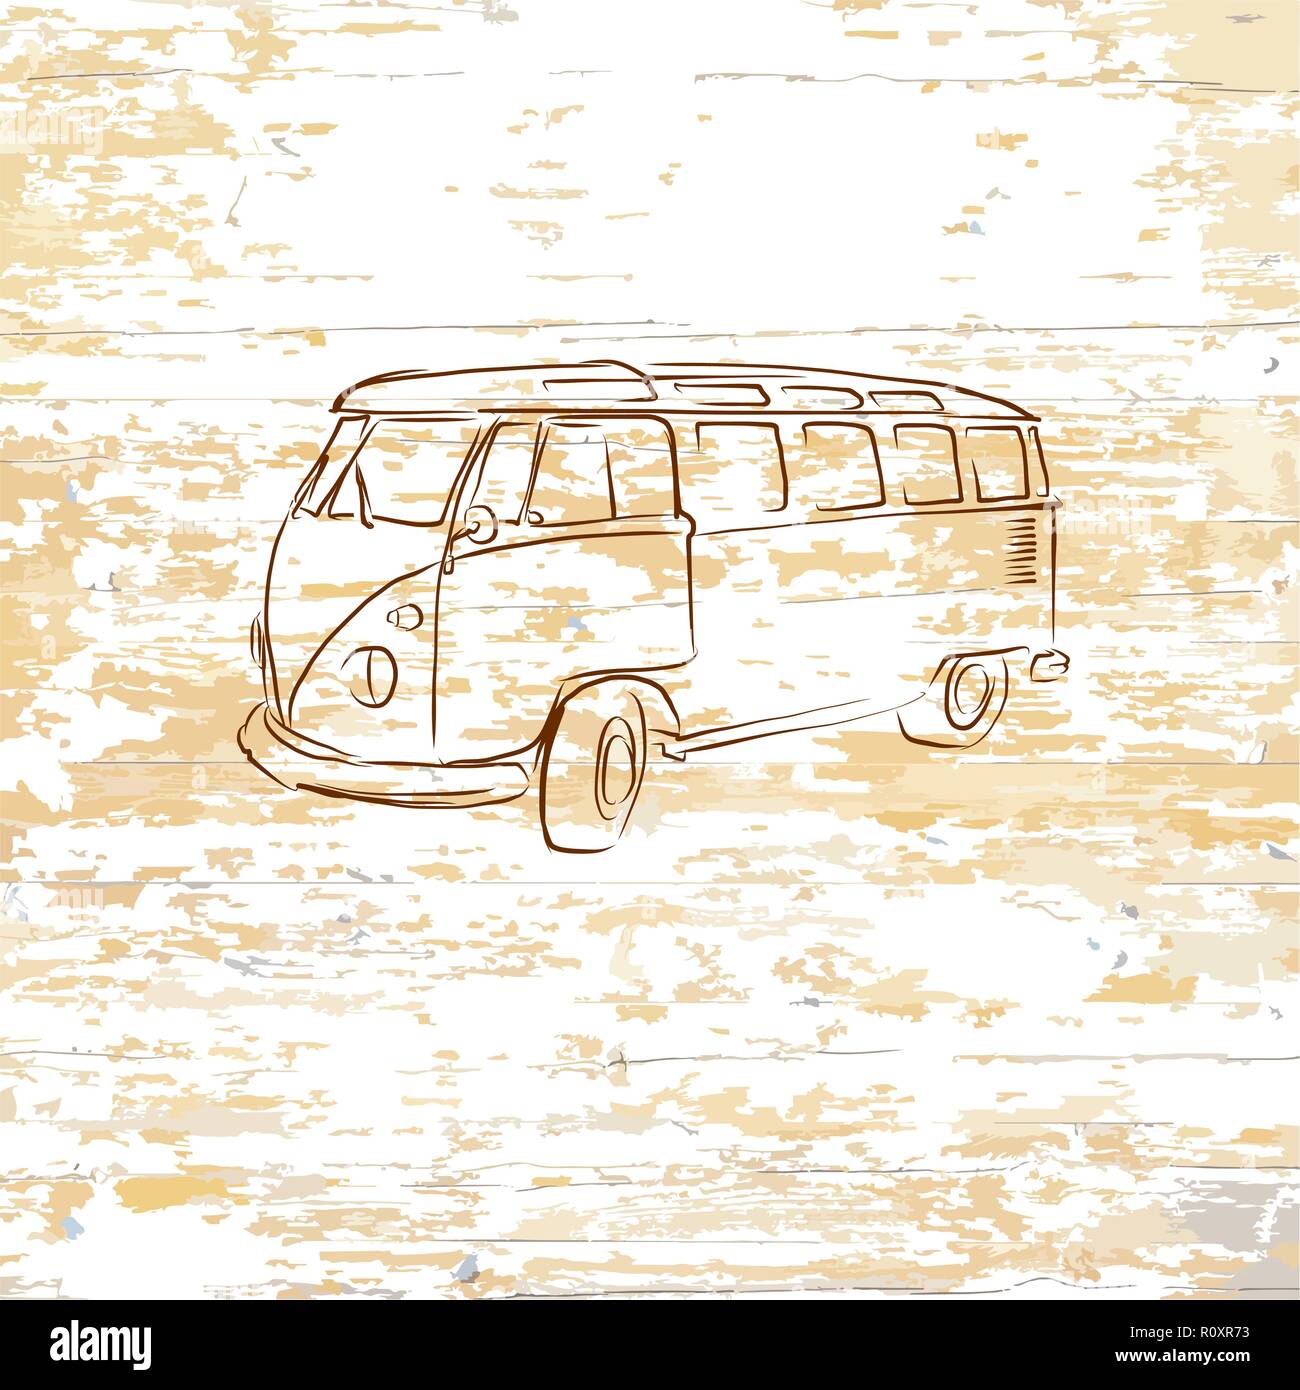 Vintage bus drawing on wooden background. Vector illustration drawn by hand. Stock Vector